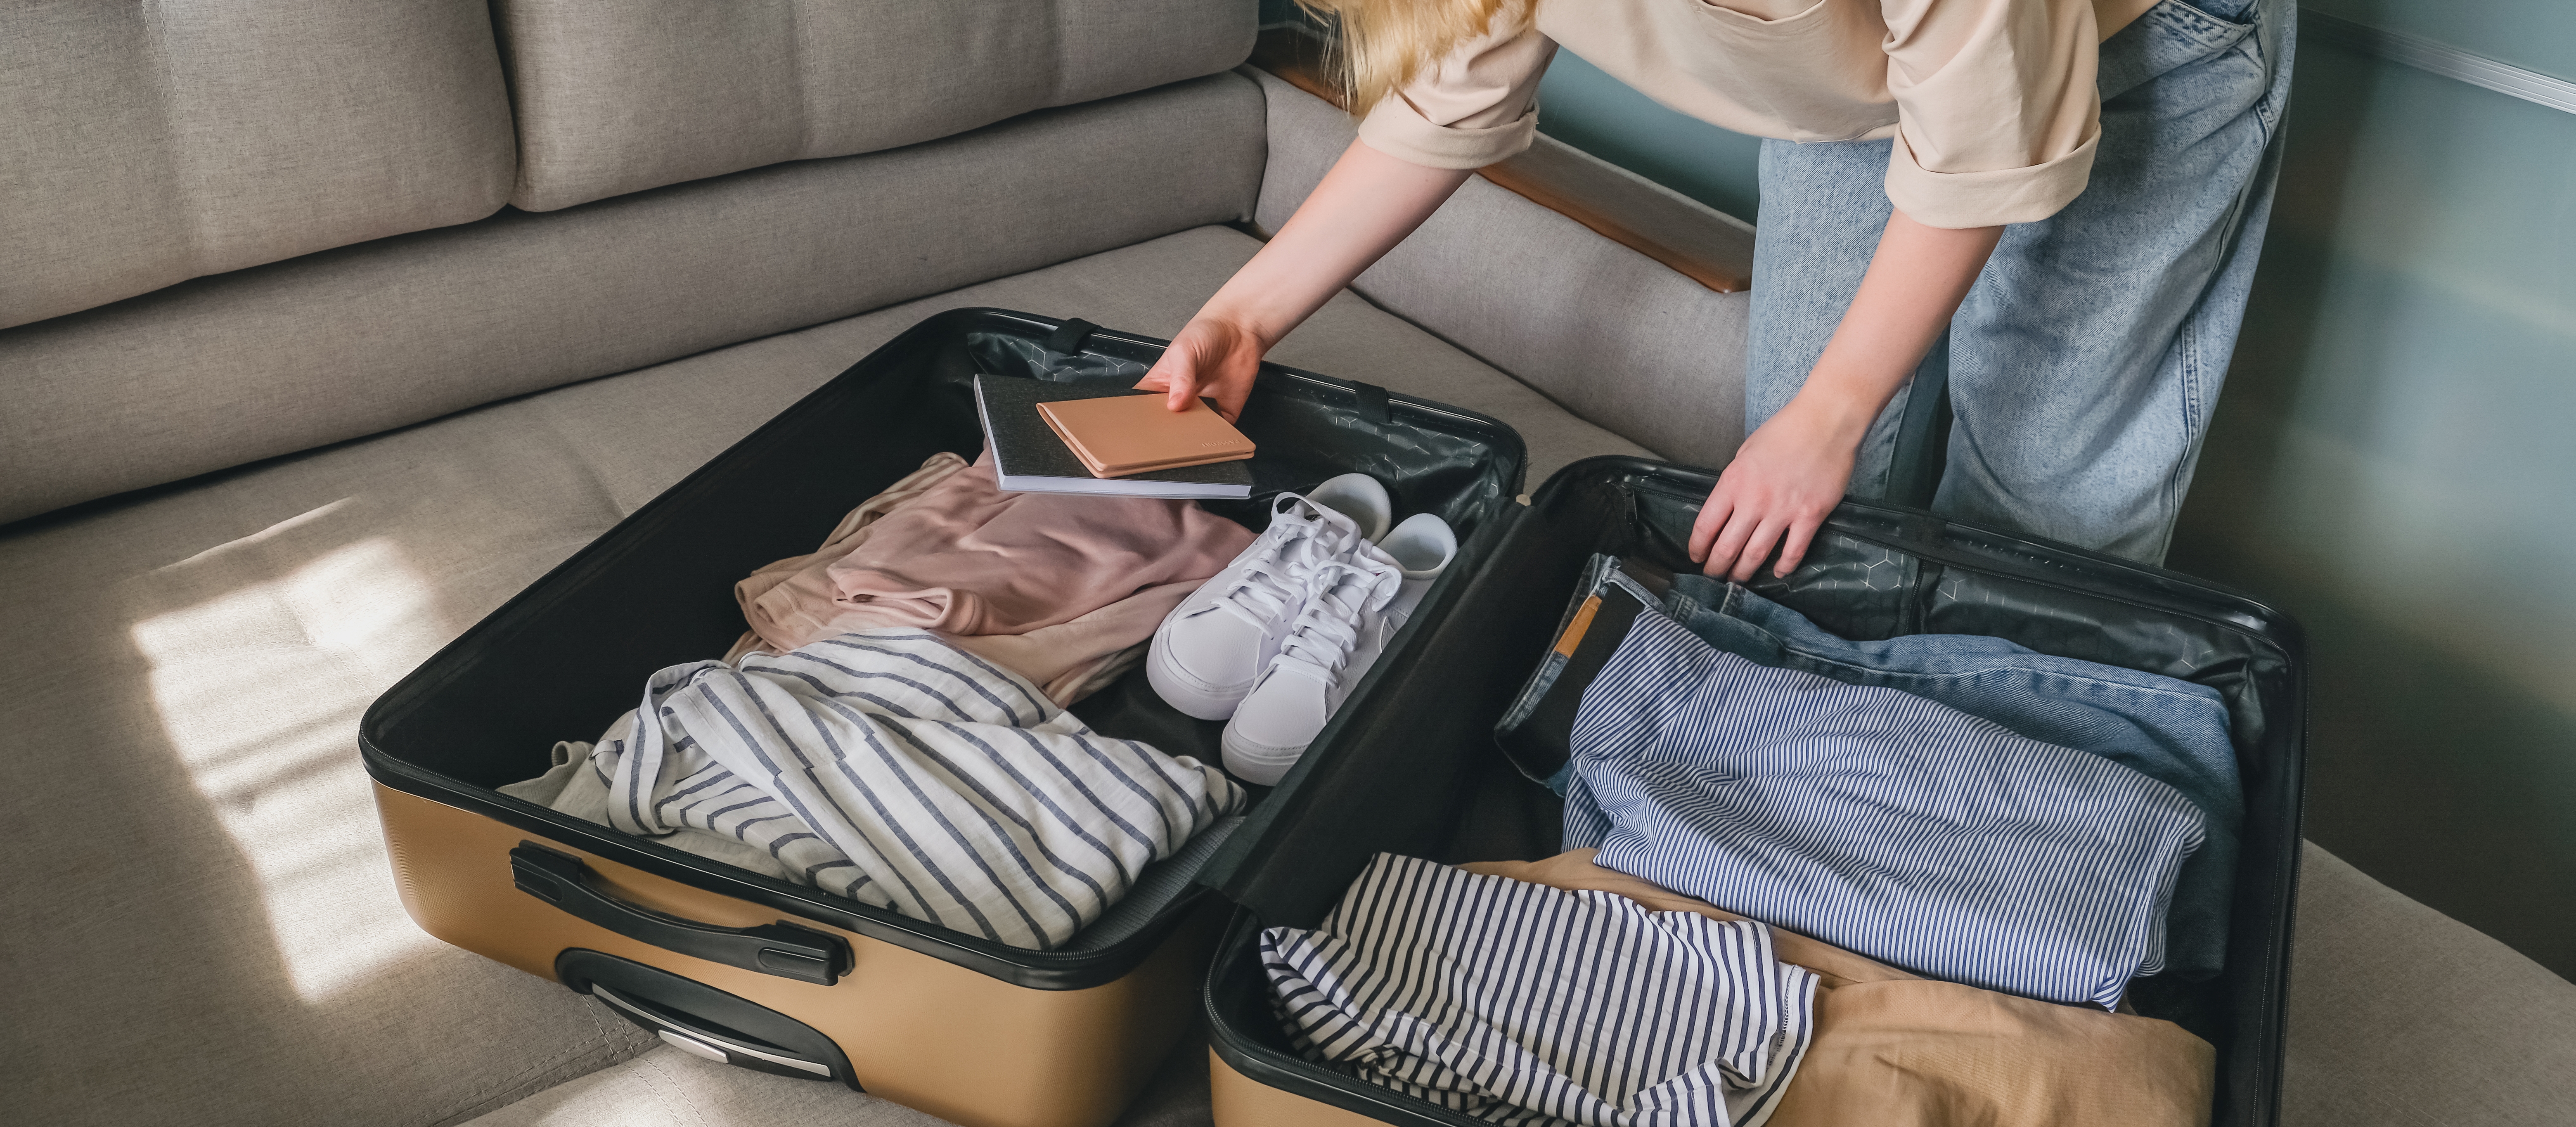 A woman packing a suitcase | Source: Shutterstock